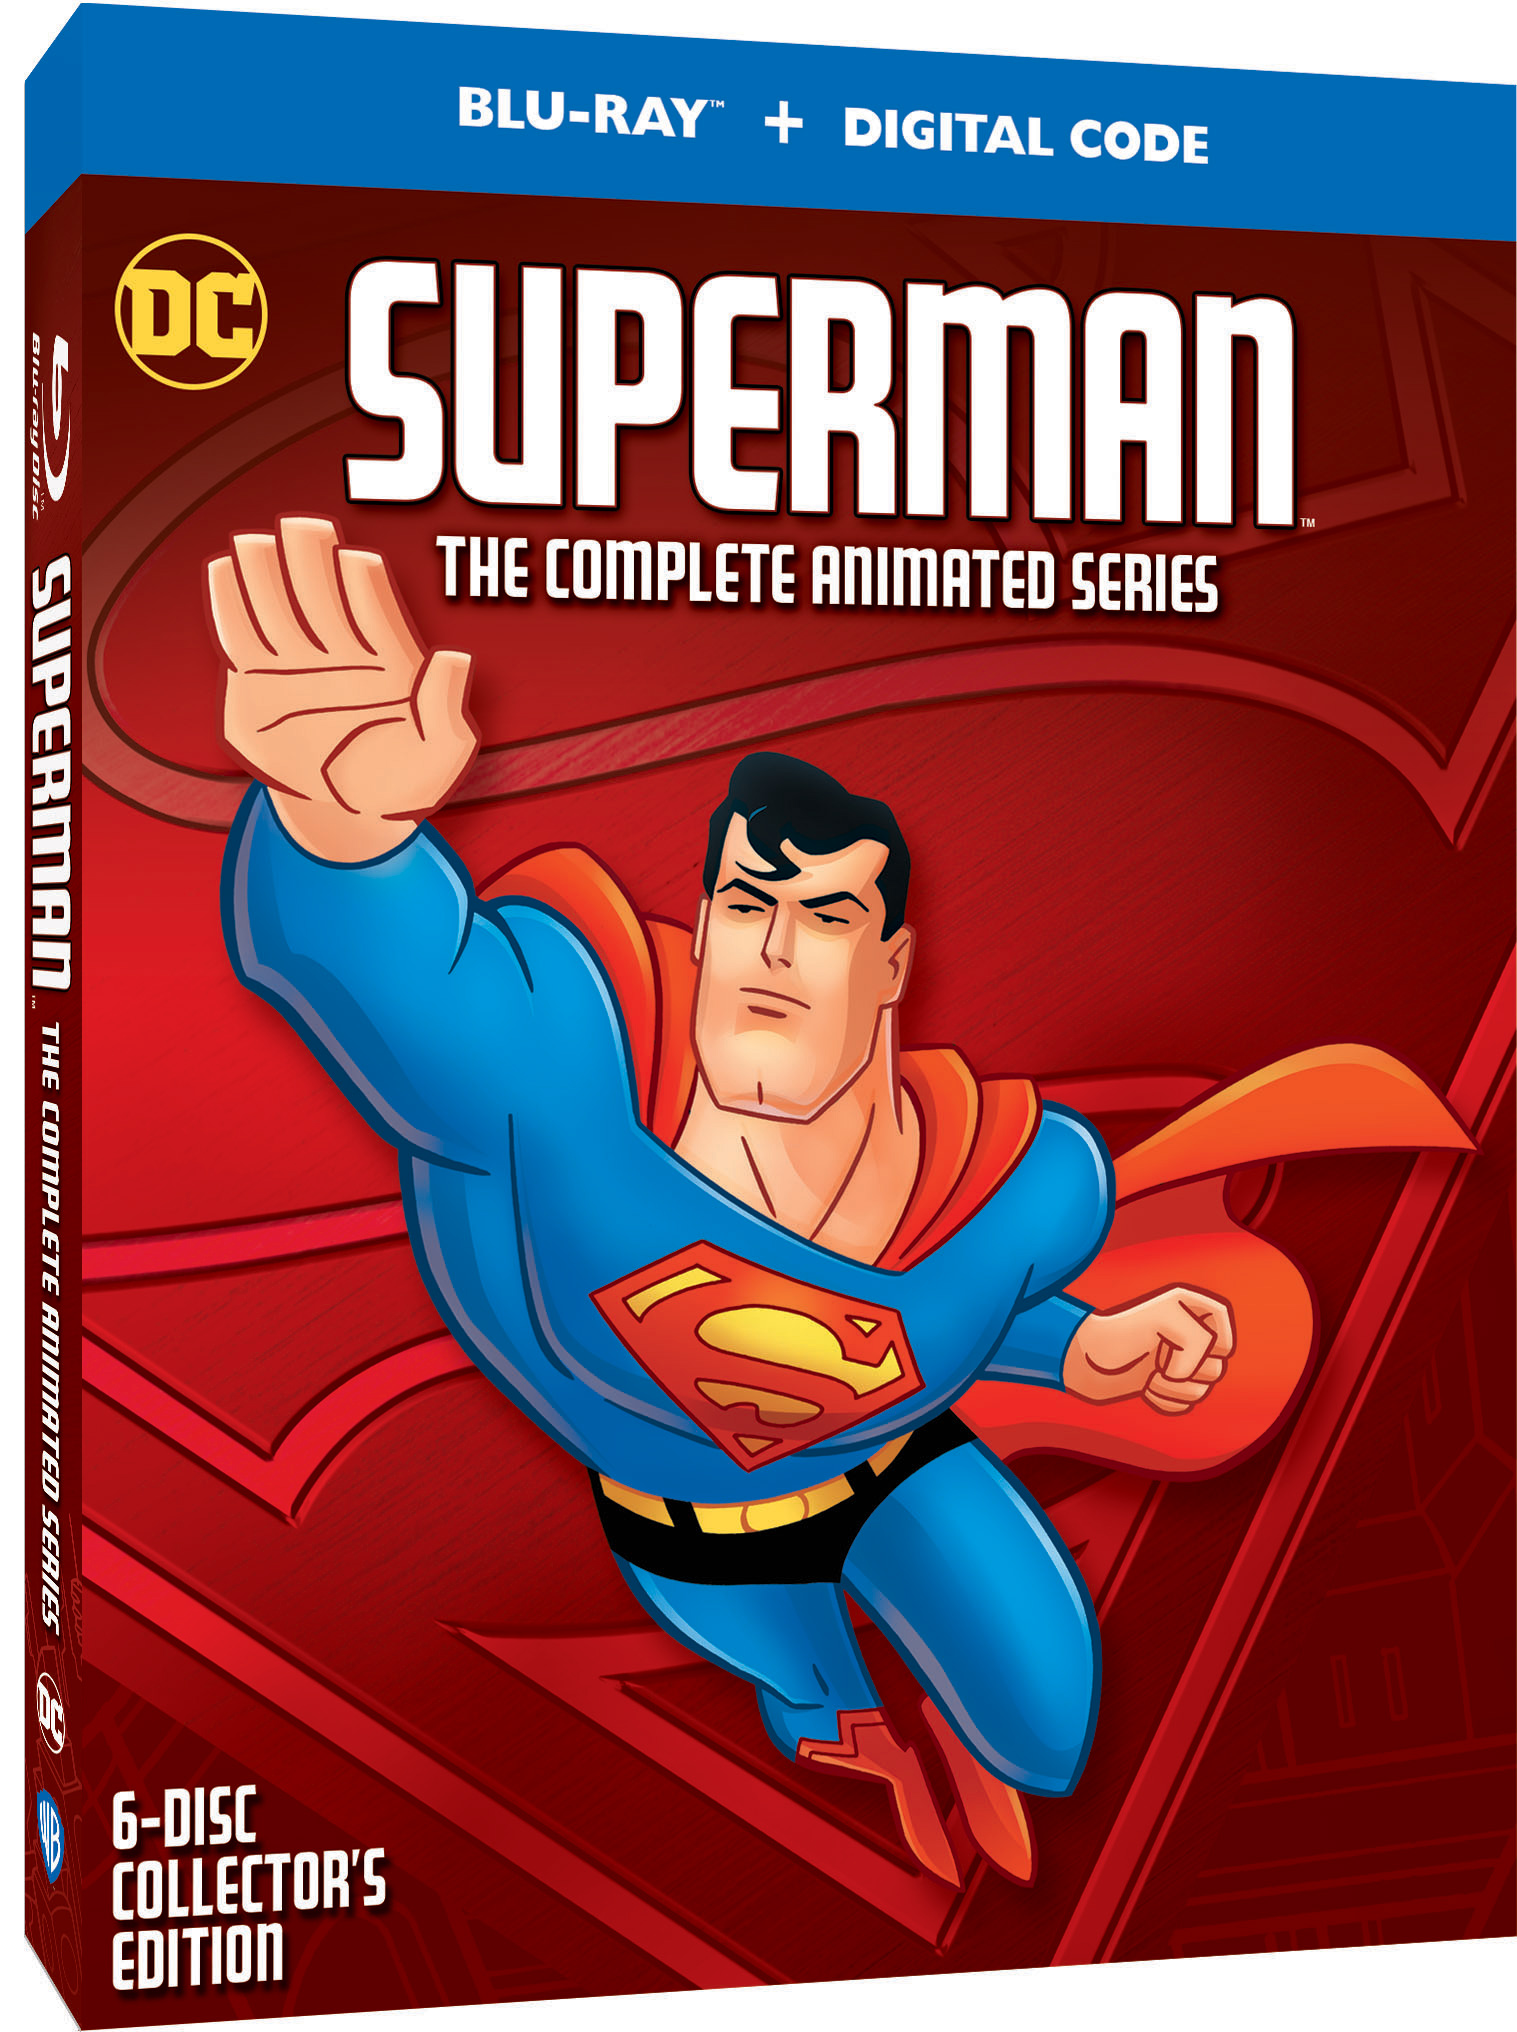 Superman: The Complete Animated Series Coming to Blu-Ray & Digital Box Set!